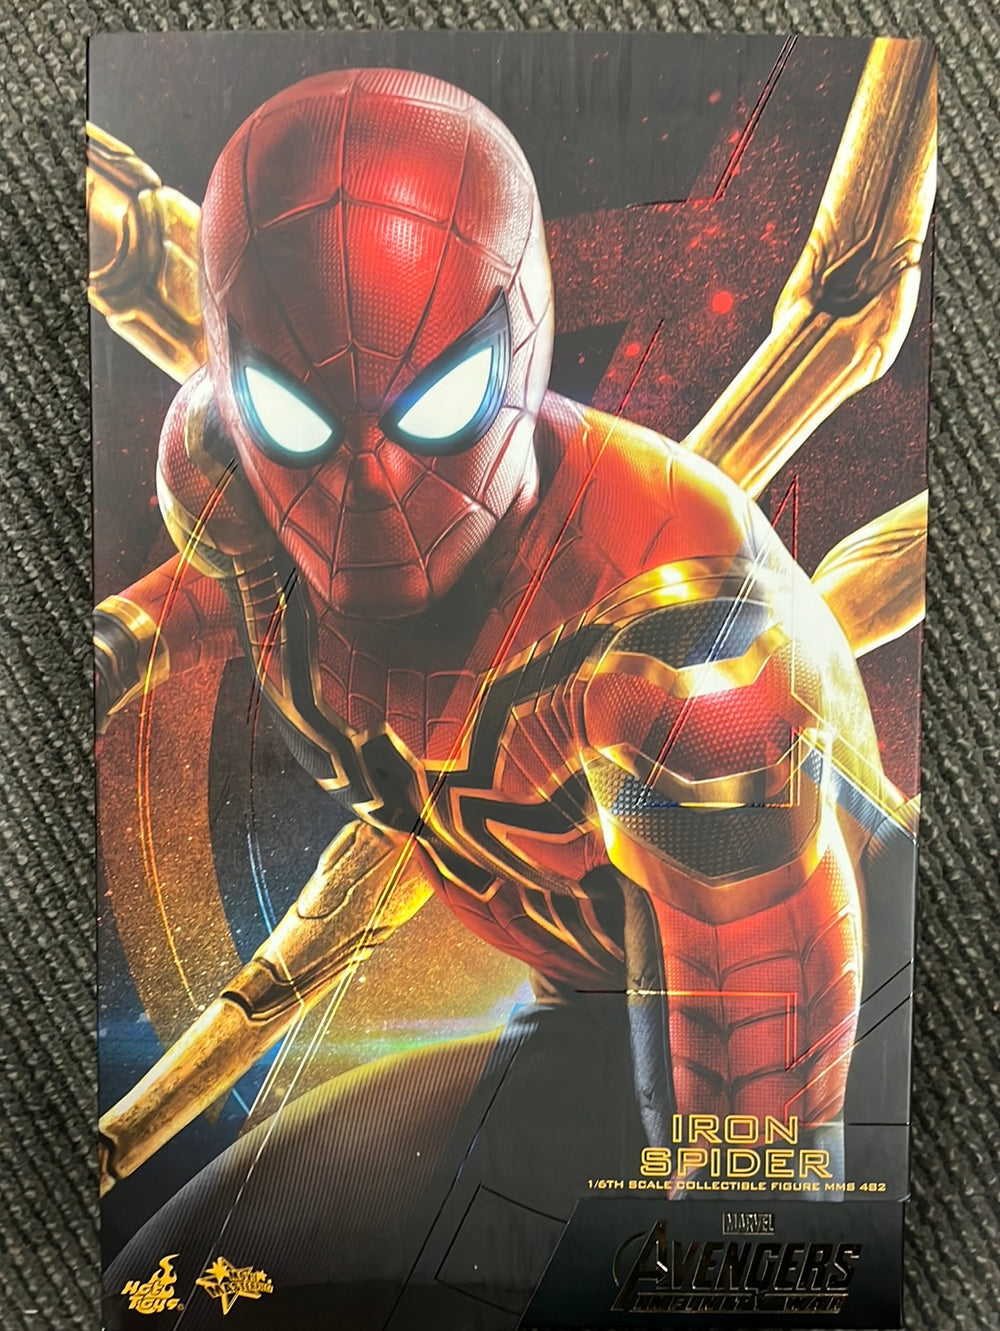 Sideshow Hot Toys 1/6 Scale Iron Spider “Avengers Infinity War”